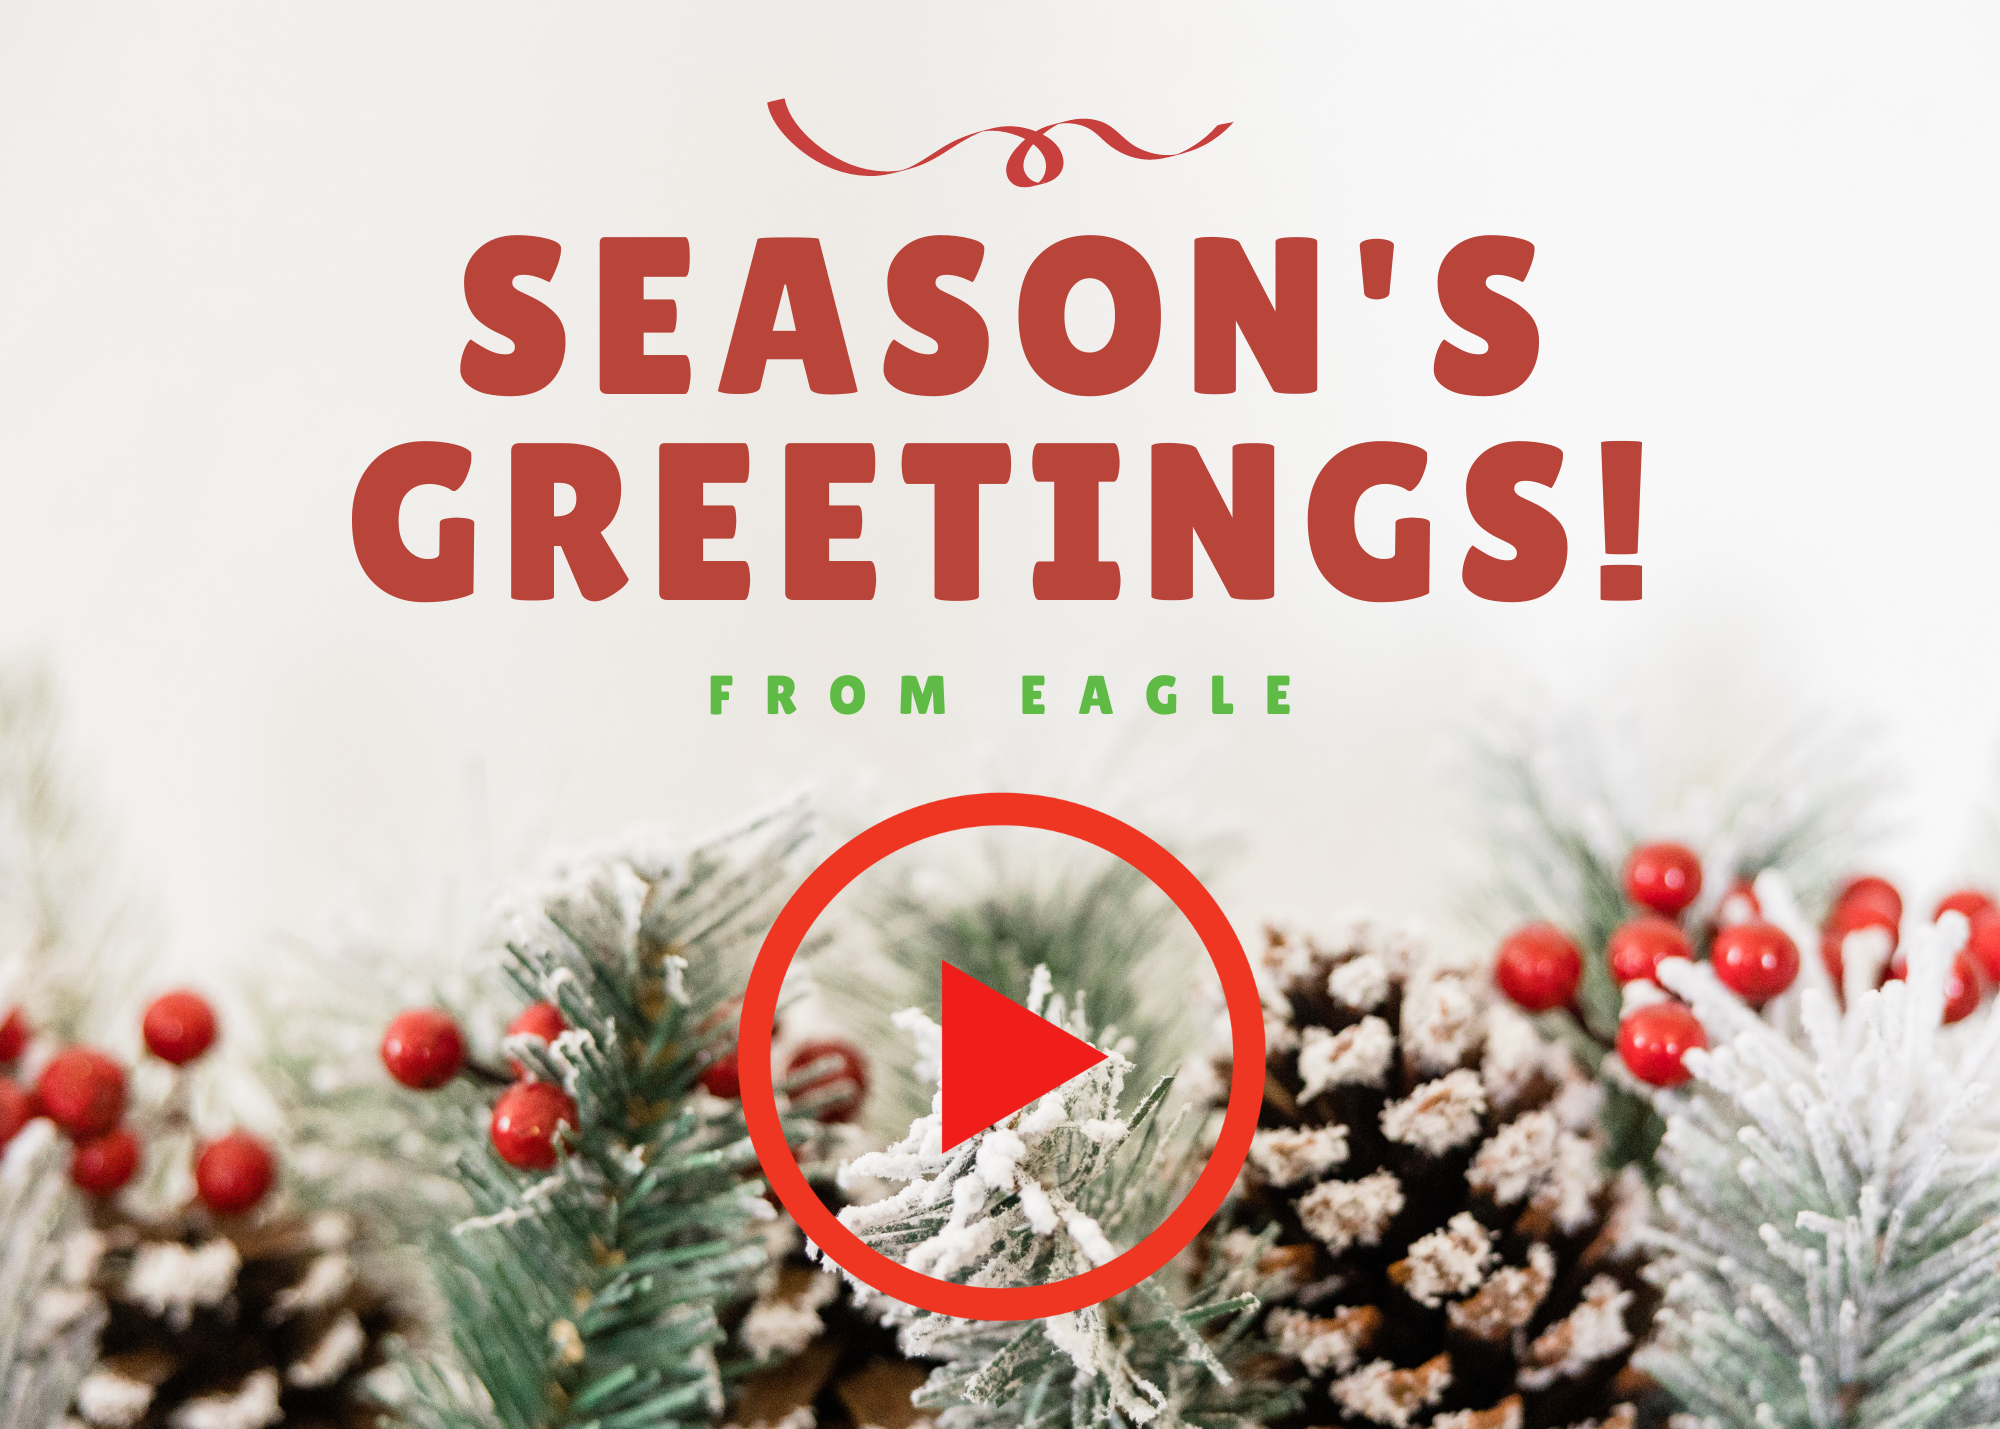 "Season's Greetings From EAGLE!," press play button.